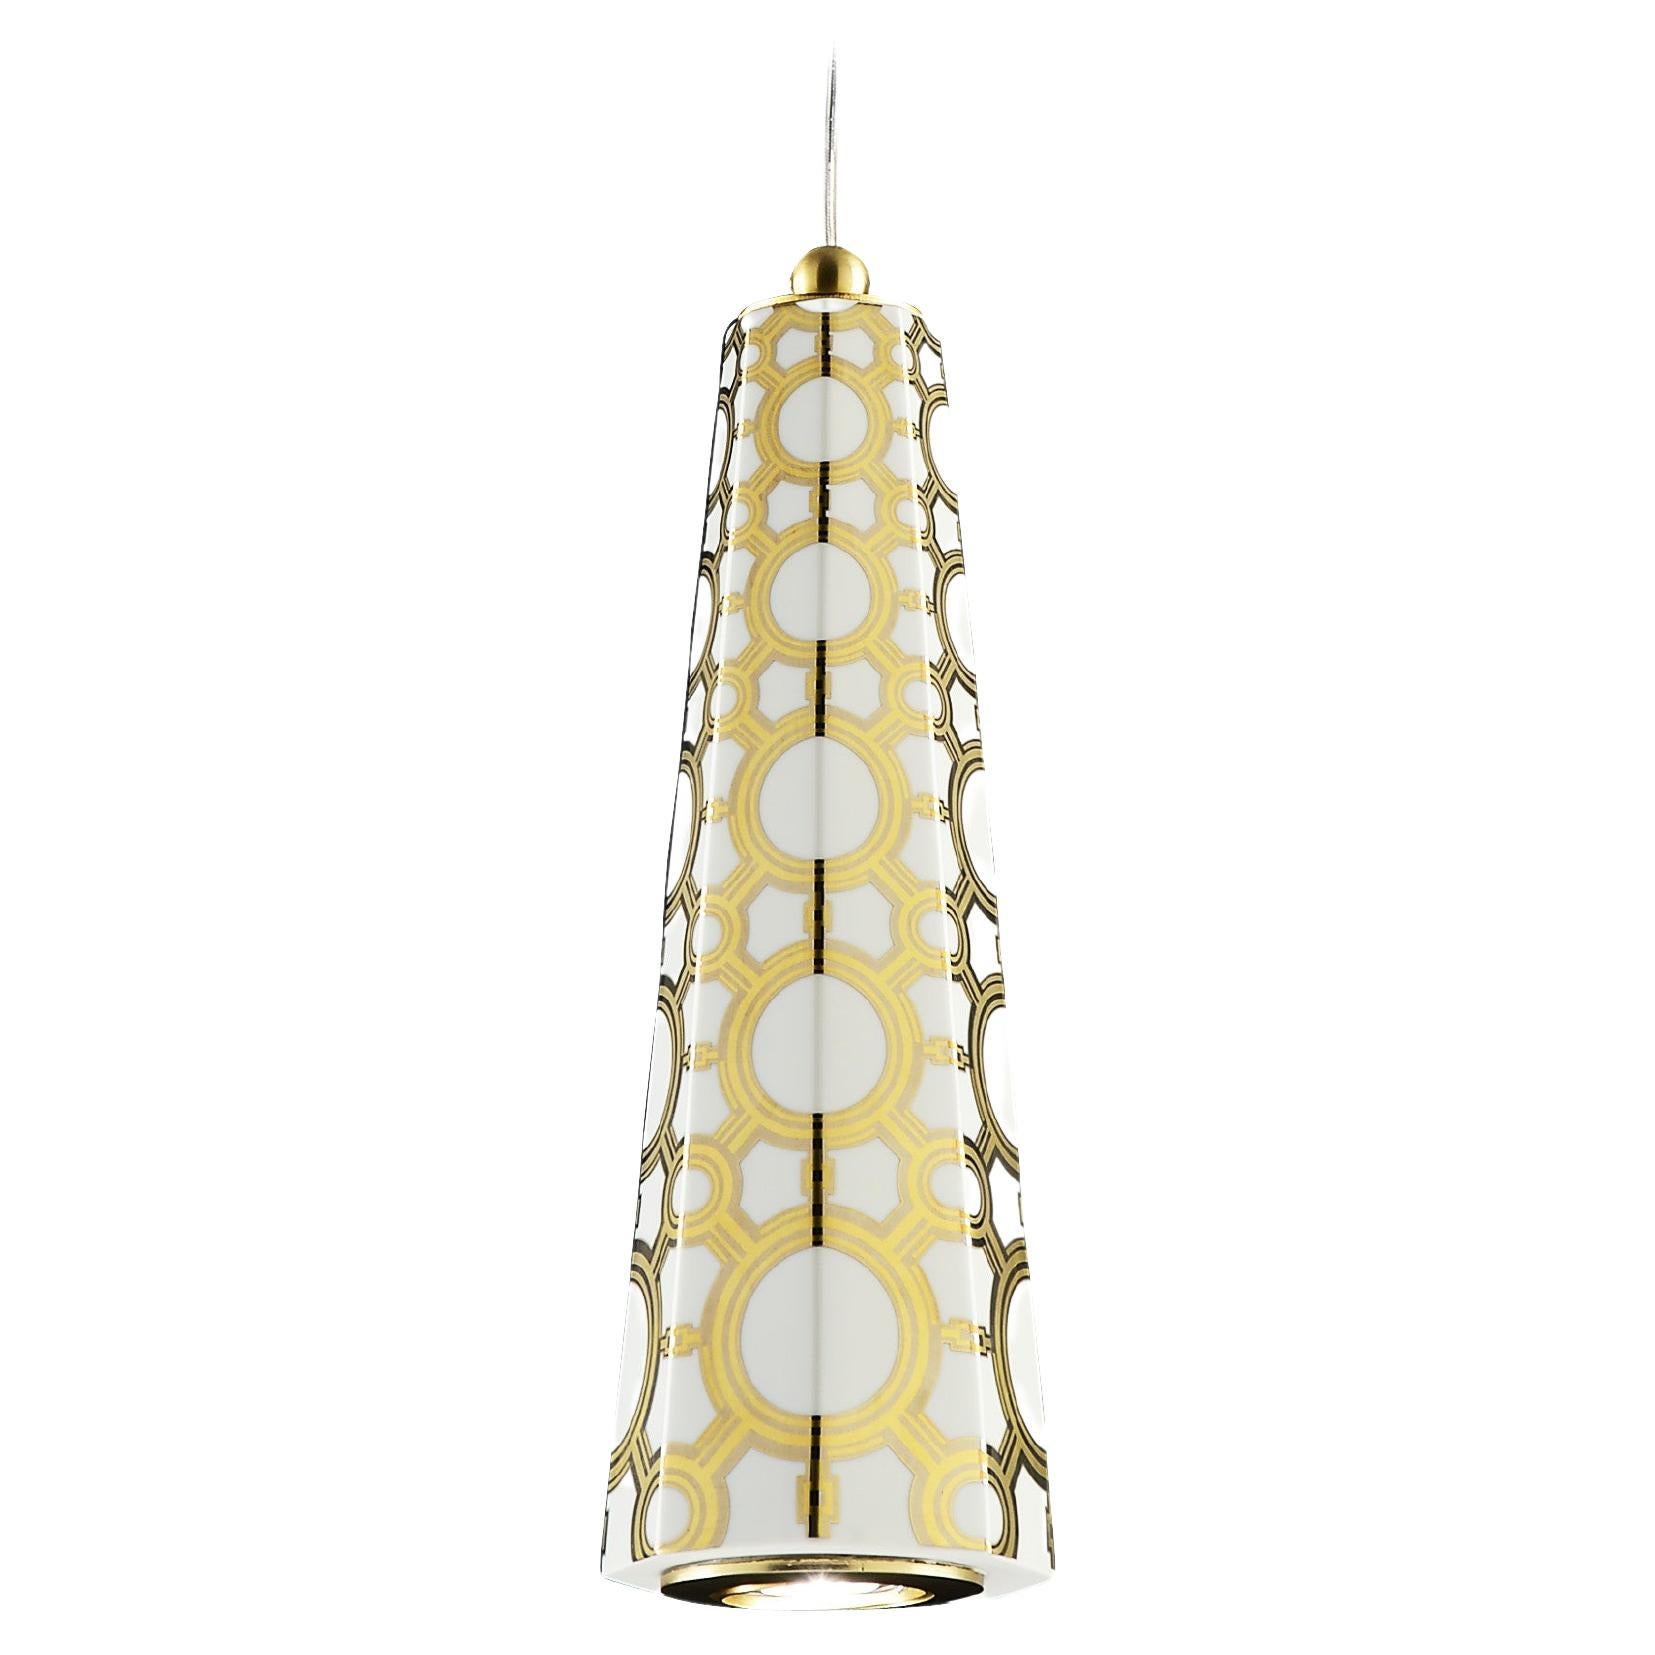 Palazzo Vecchio Collection - Suspension Lamp - Gold and Platinum Decorations For Sale